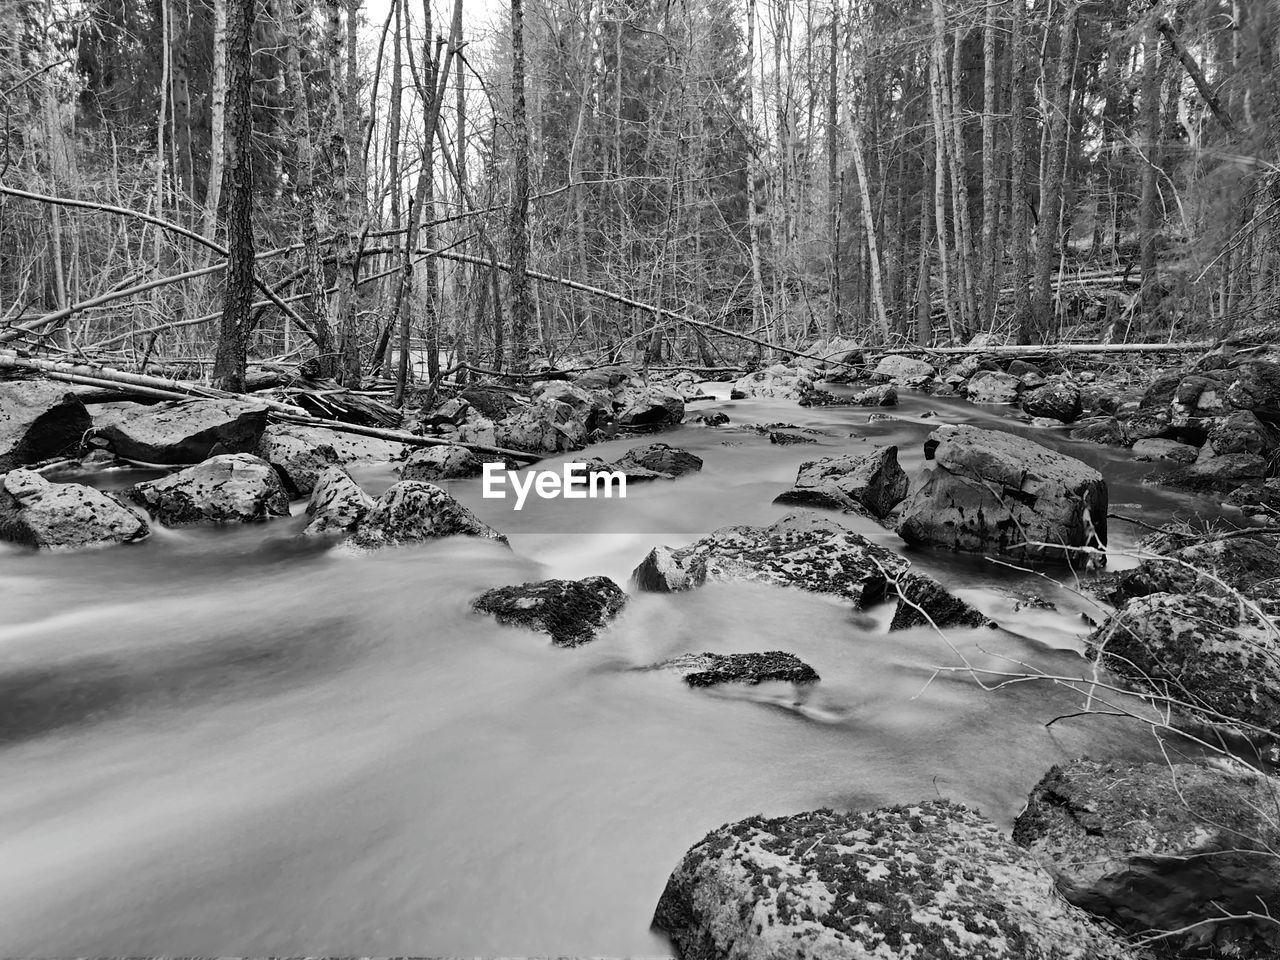 tree, forest, plant, land, water, nature, black and white, beauty in nature, tranquility, scenics - nature, stream, monochrome photography, woodland, monochrome, wilderness, no people, trunk, tree trunk, non-urban scene, tranquil scene, day, river, environment, natural environment, winter, outdoors, snow, landscape, growth, idyllic, rock